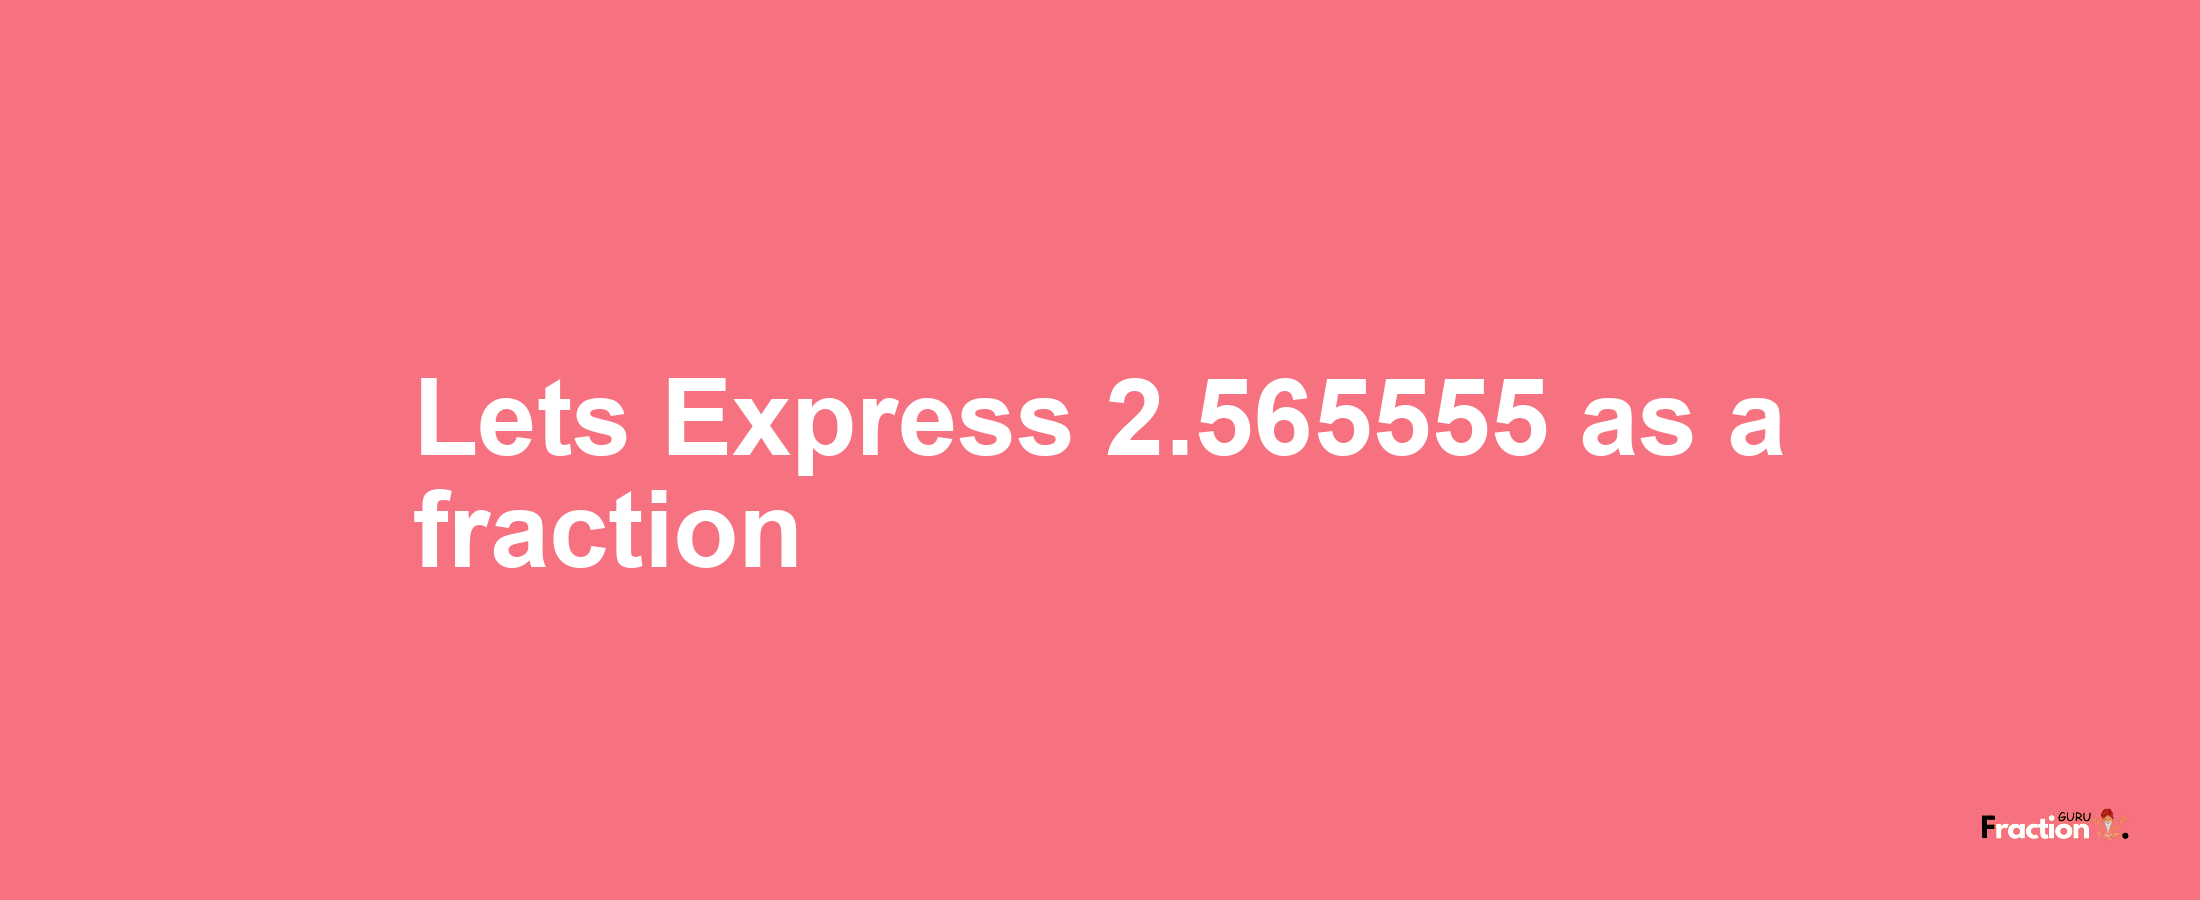 Lets Express 2.565555 as afraction